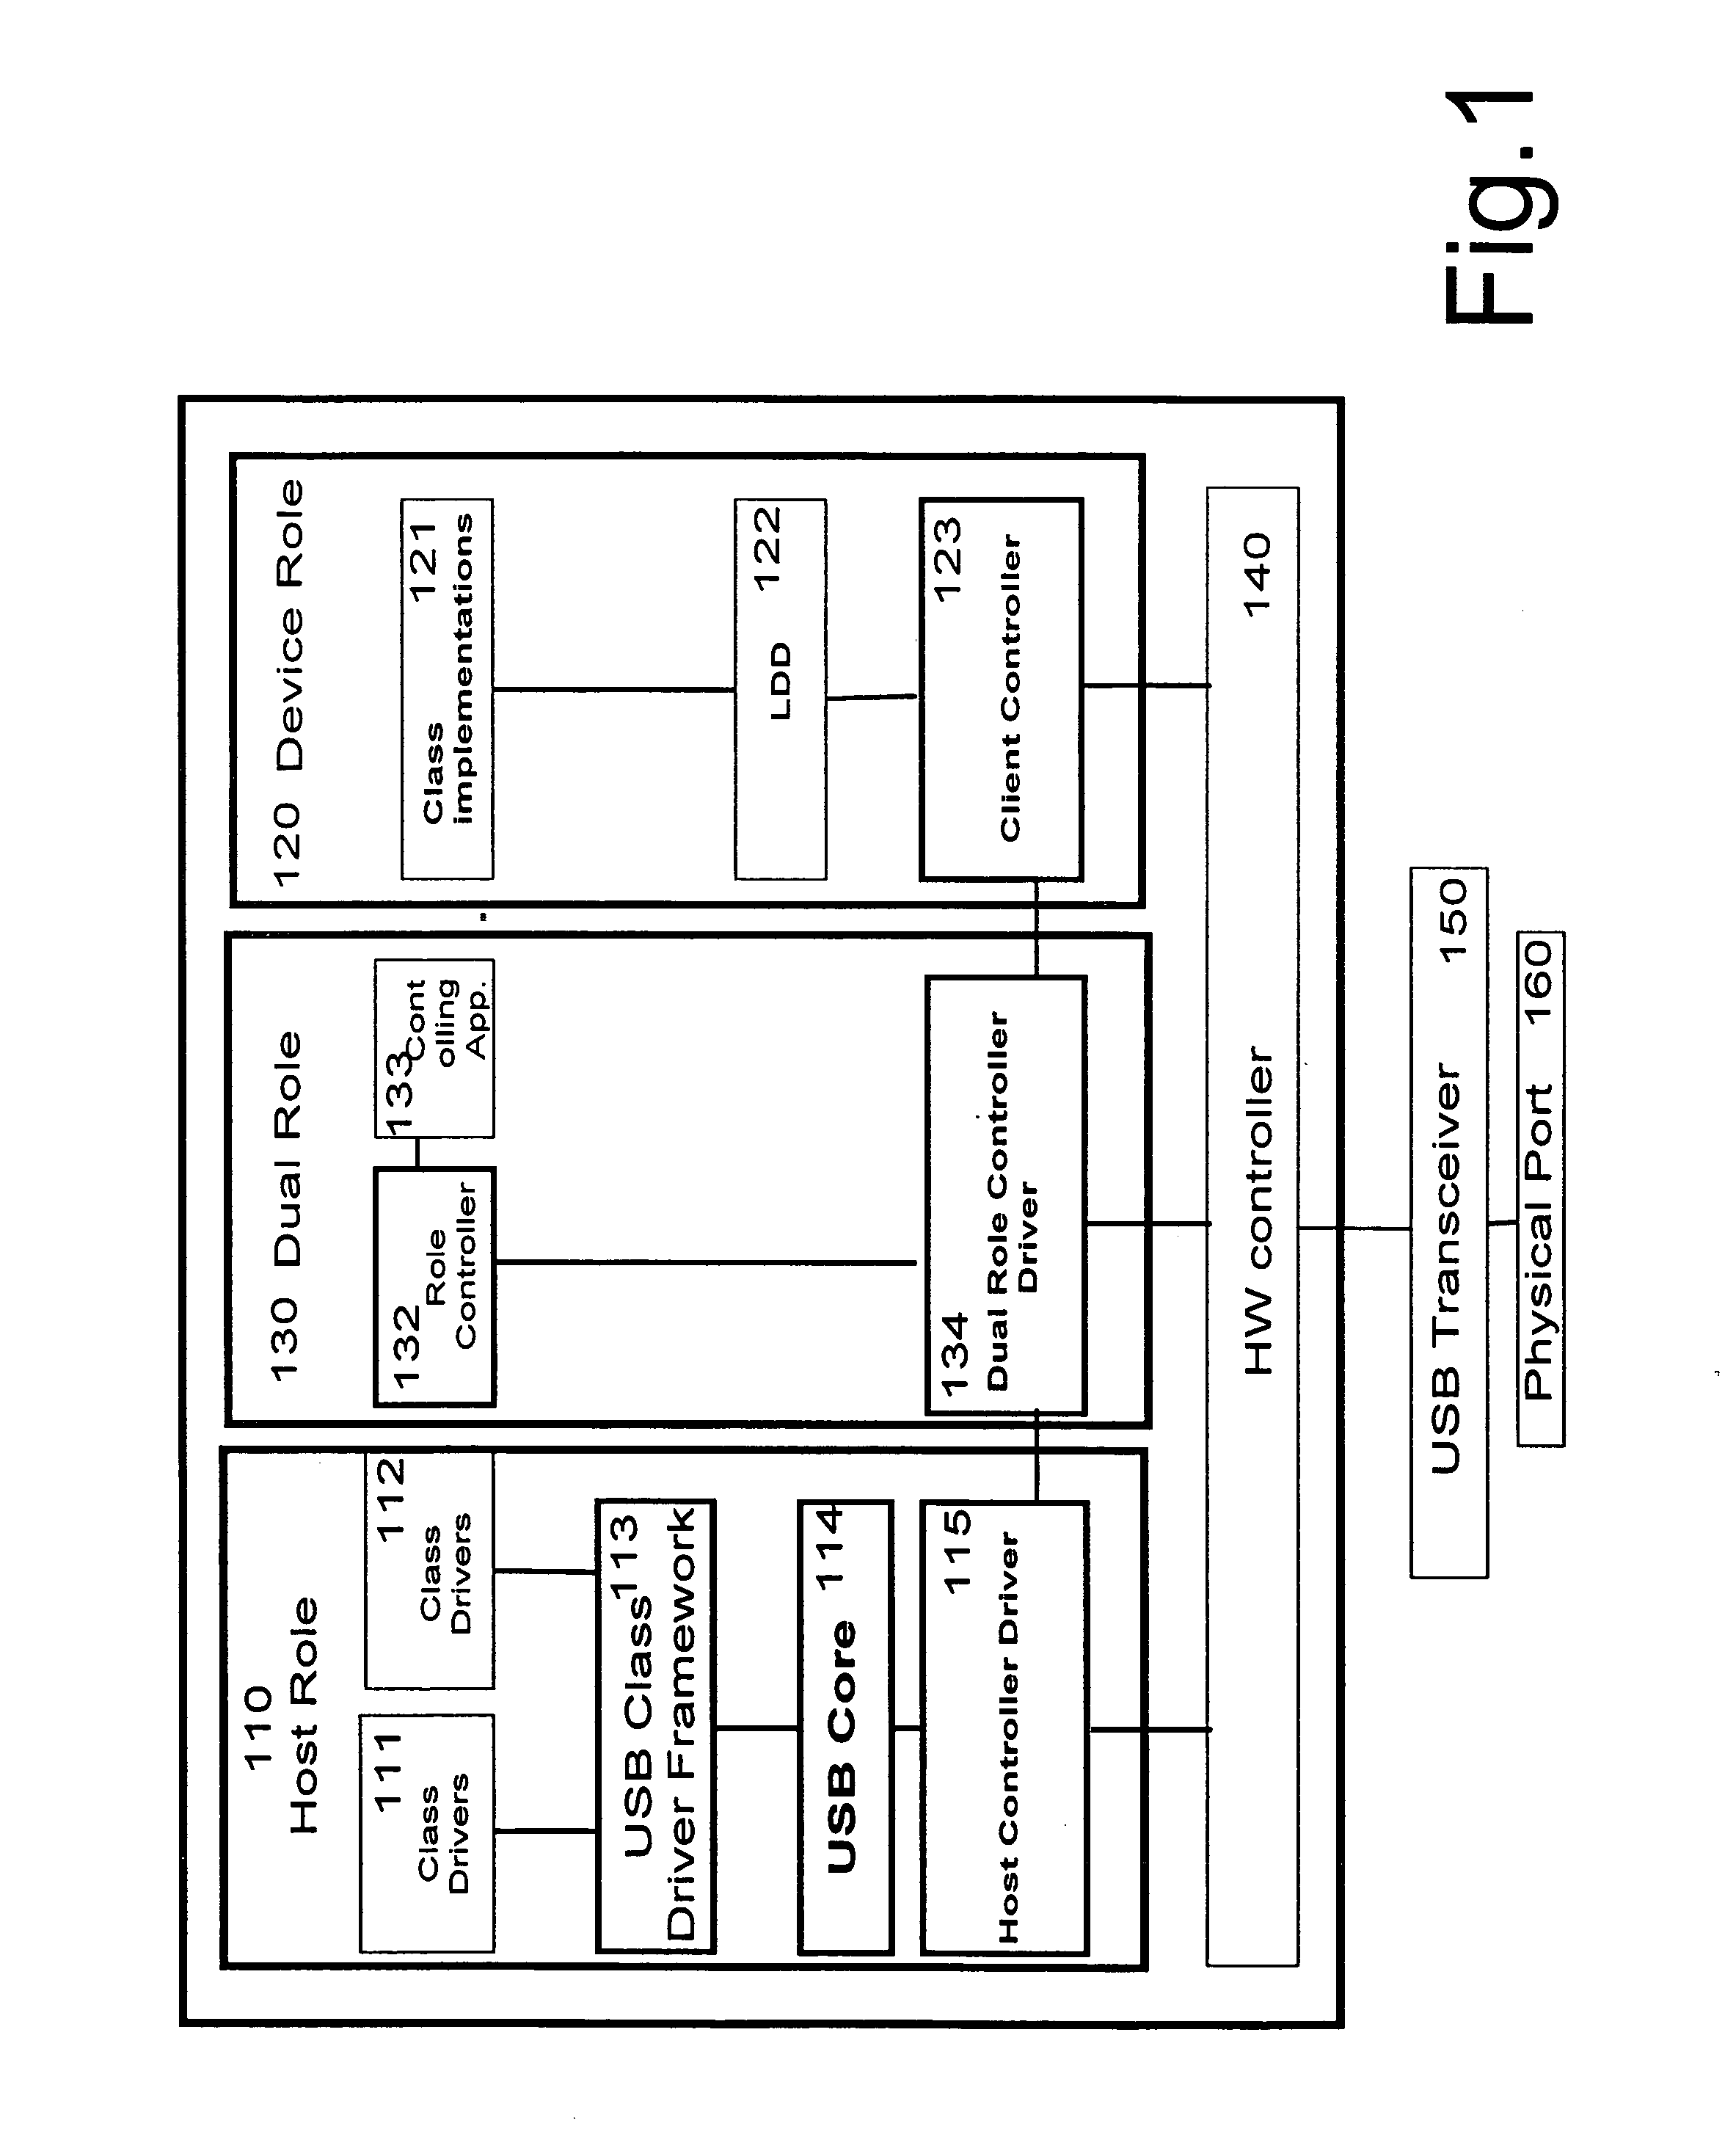 Policy based method, device, system and computer program for controlling external connection activity